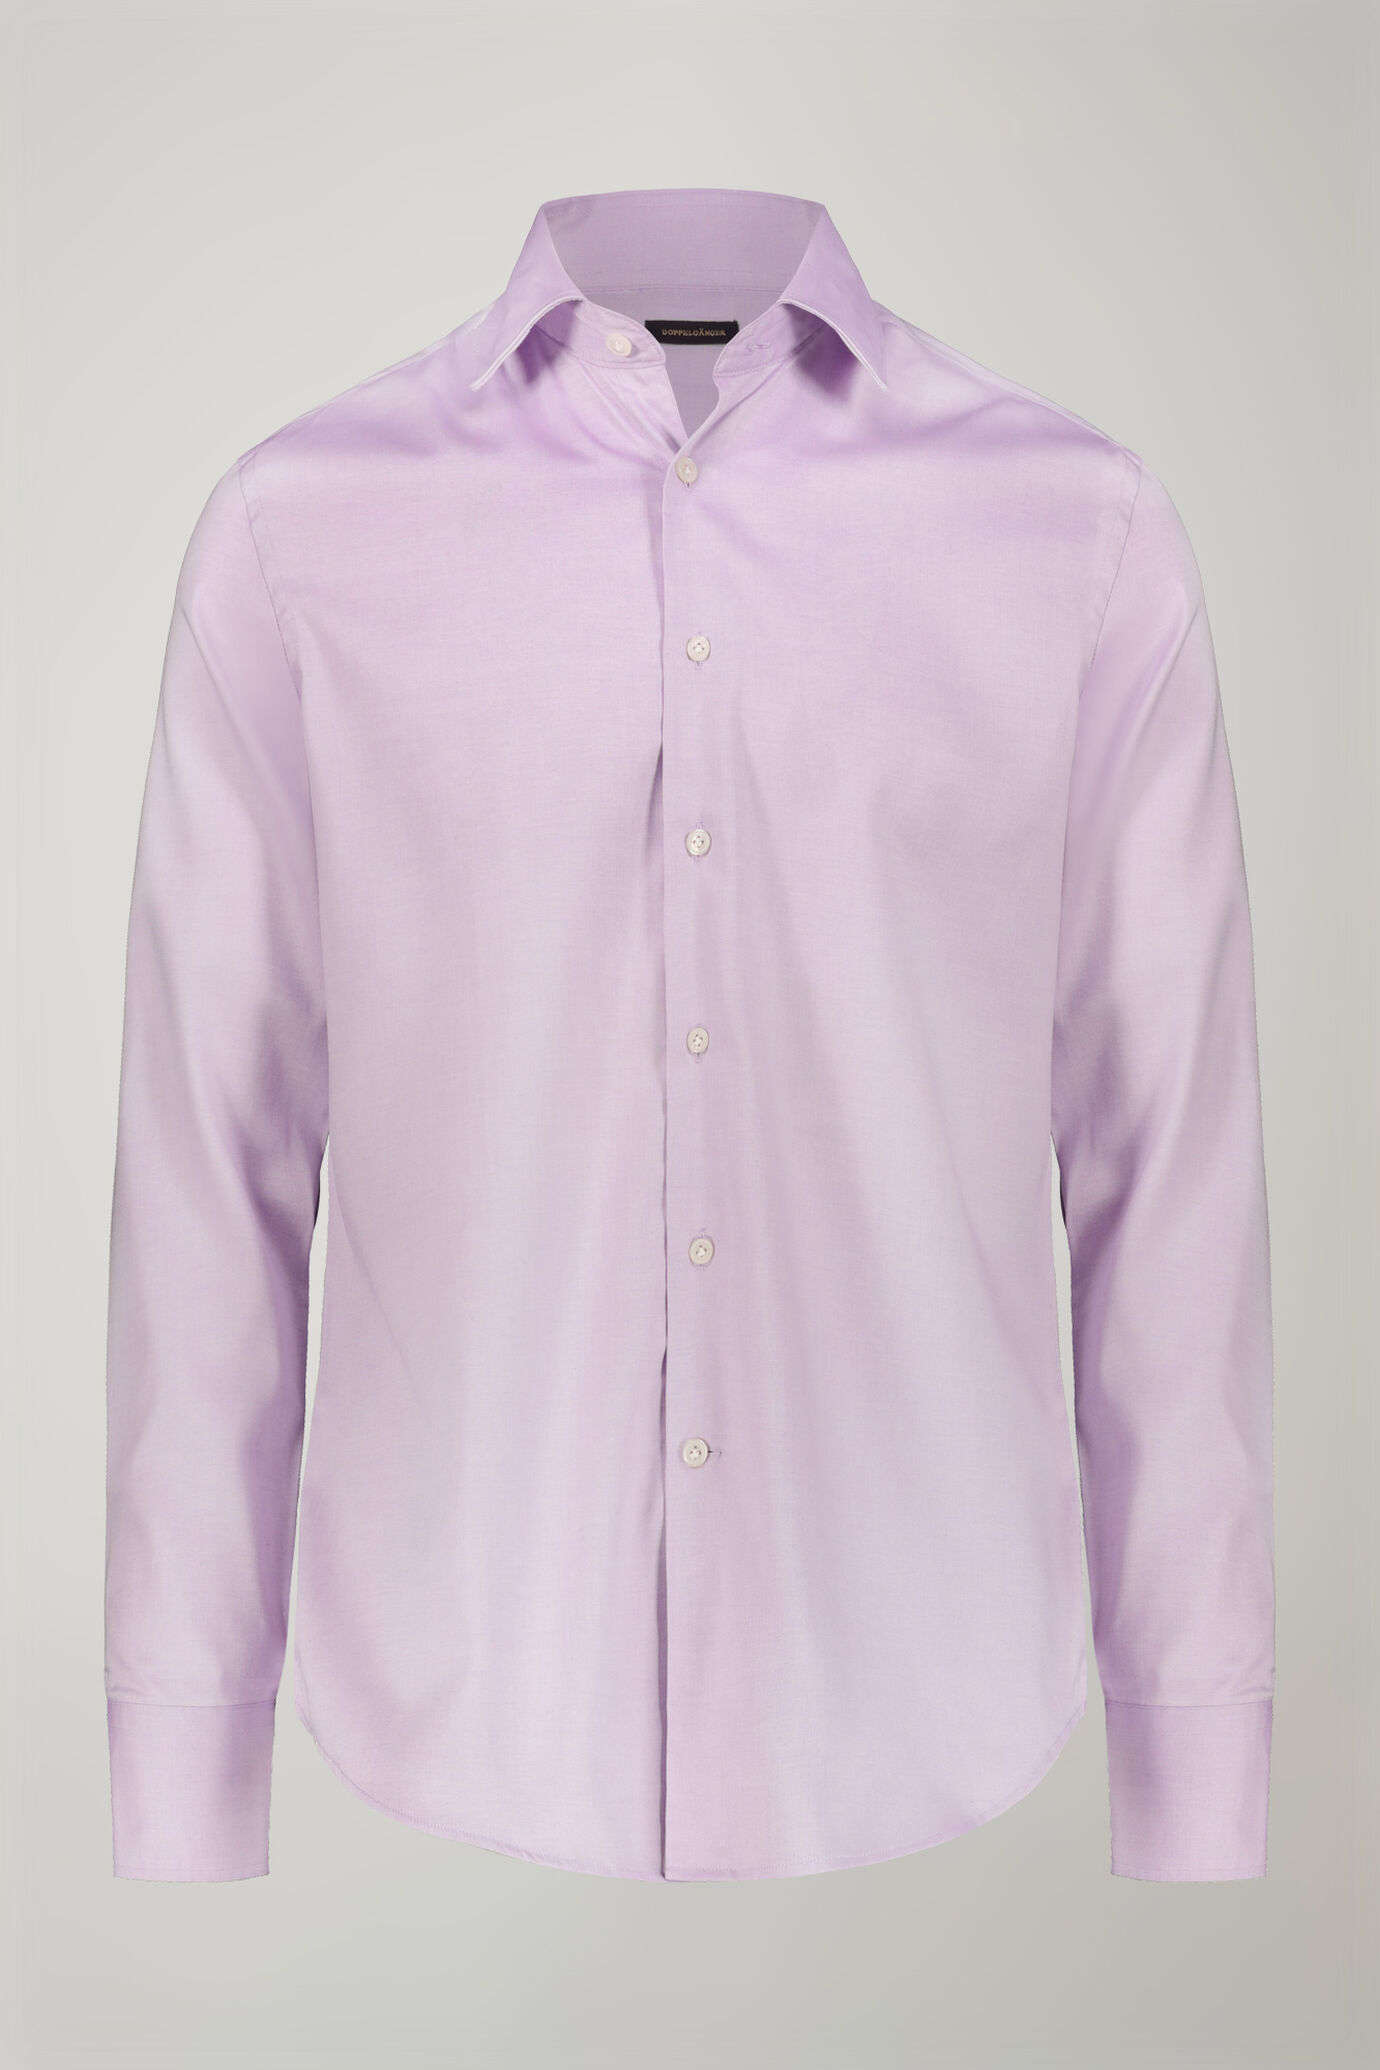 Men's shirt with classic collar 100% cotton oxford fabric regular fit image number 5